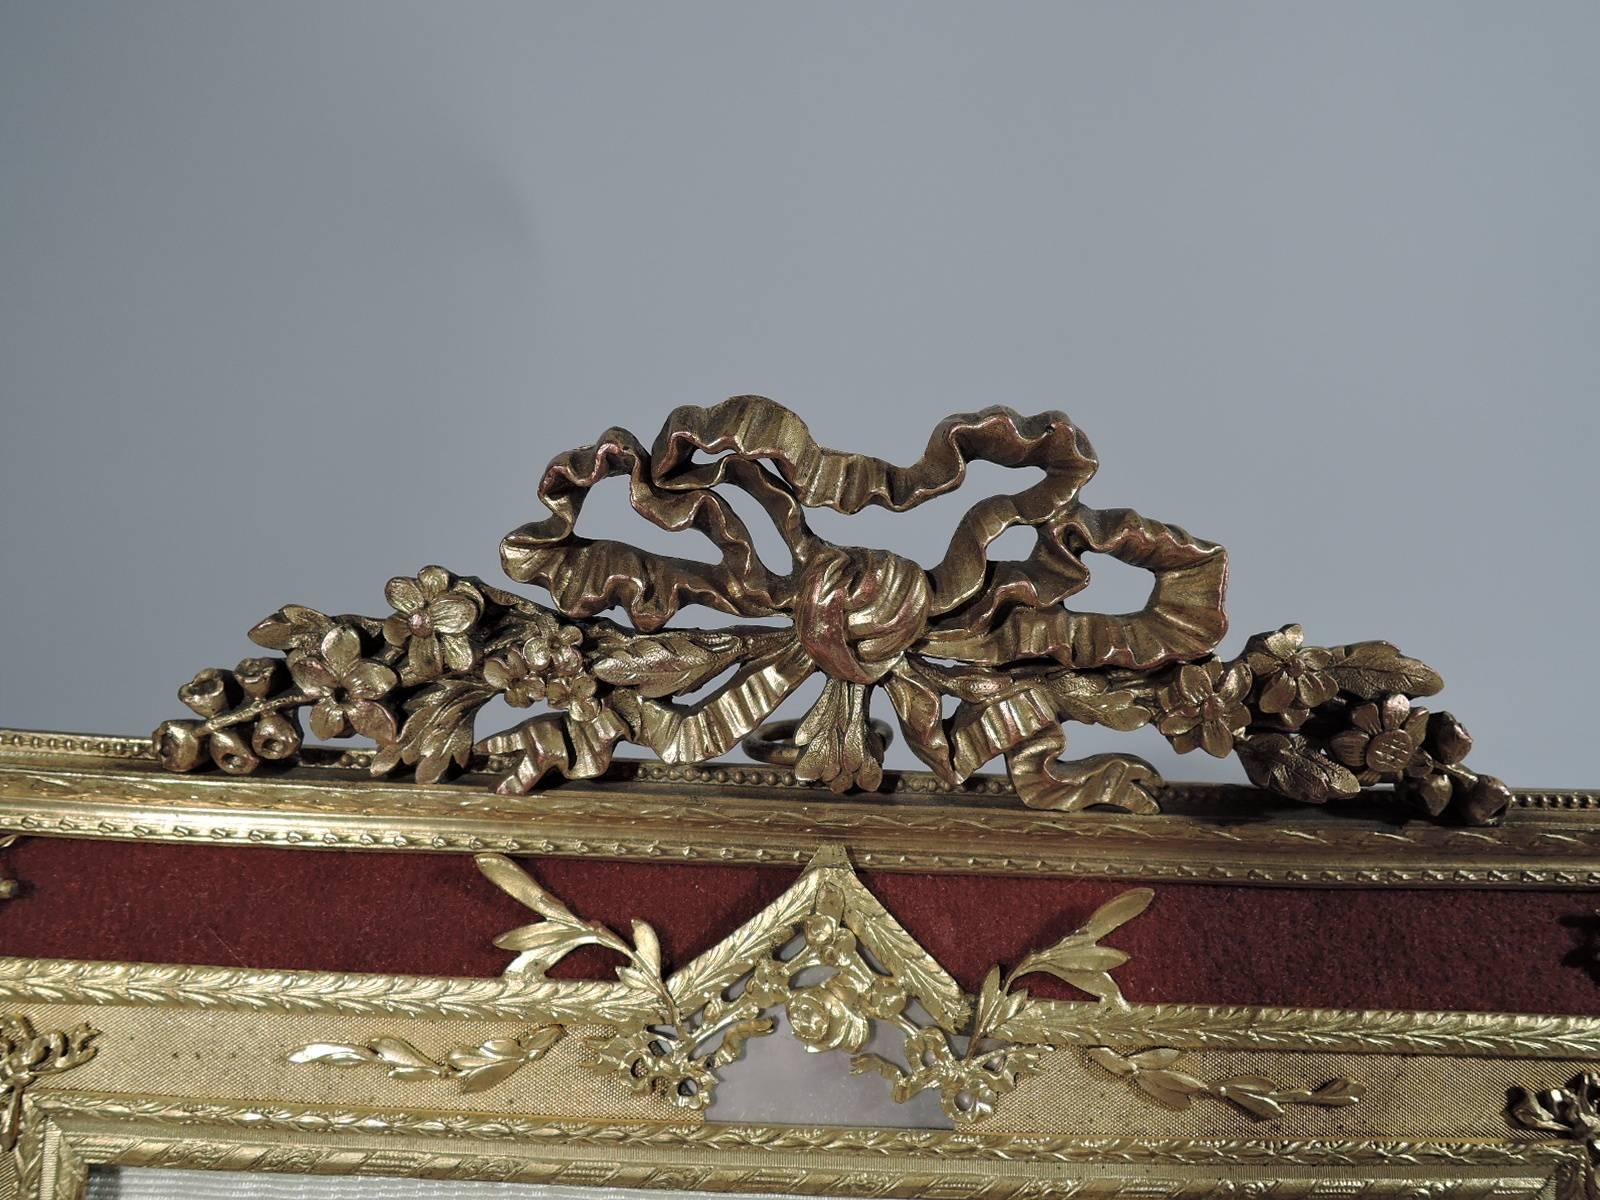 Antique French Rococo revival picture frame. Rectangular window bordered by gilt bronze inset with mother-of-pearl and in turn bordered by dark red (maroon) fabric. Ornament includes beading, flowers, leaves, rinceaux, and paterae. Pierced pediment